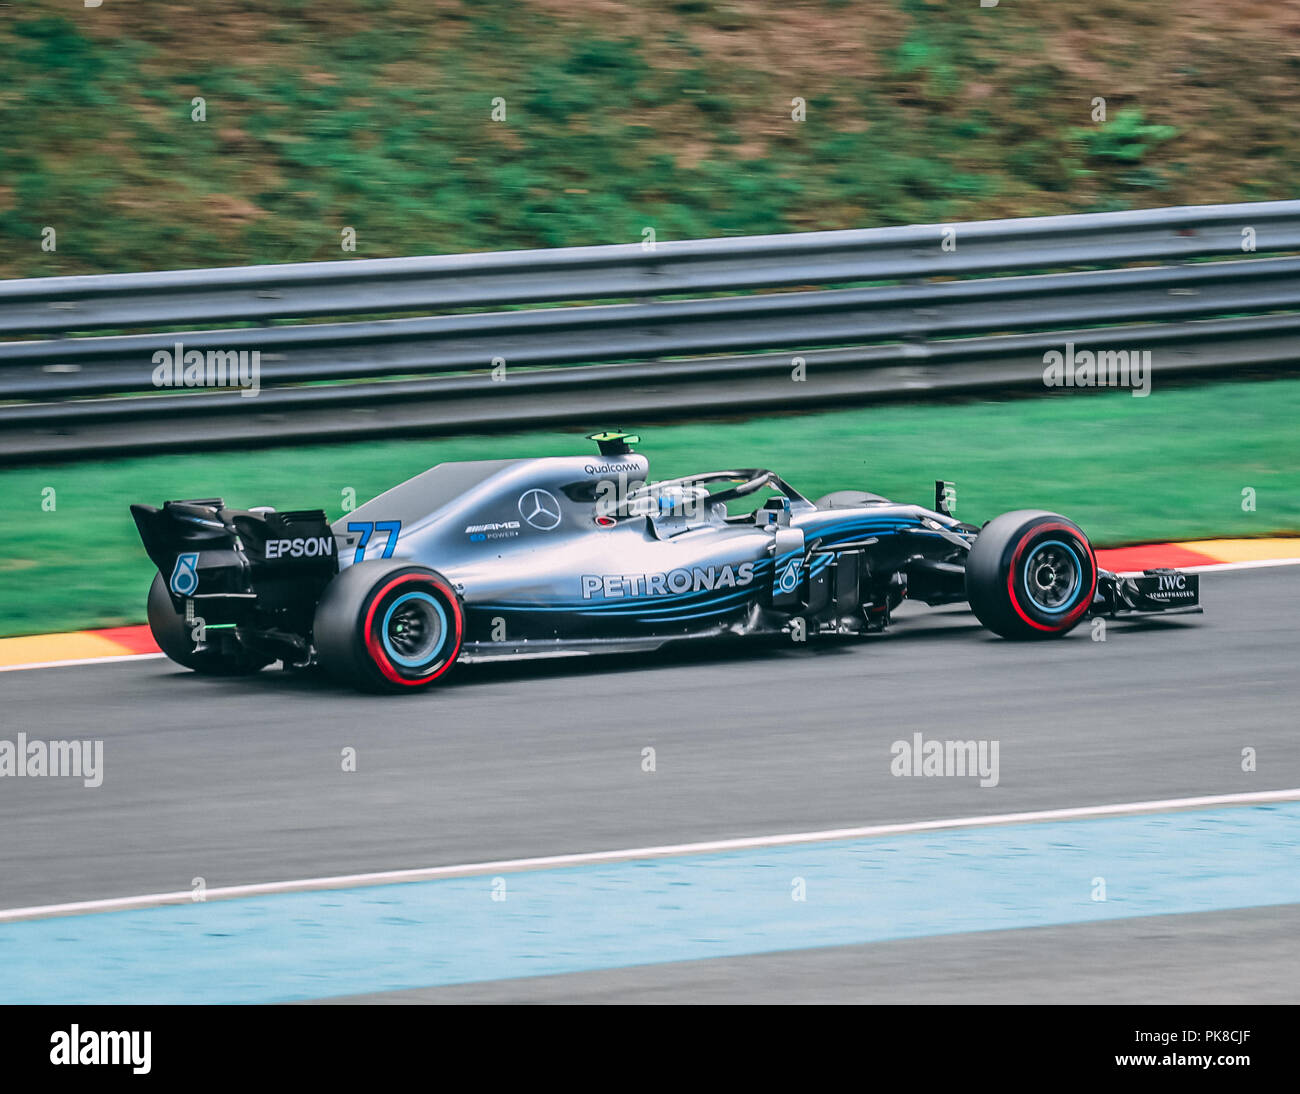 Bottas in his Silver Arrow Mercedes AMG at the Belgian Grand Prix, moving from 17th to 4th on the day. Stock Photo